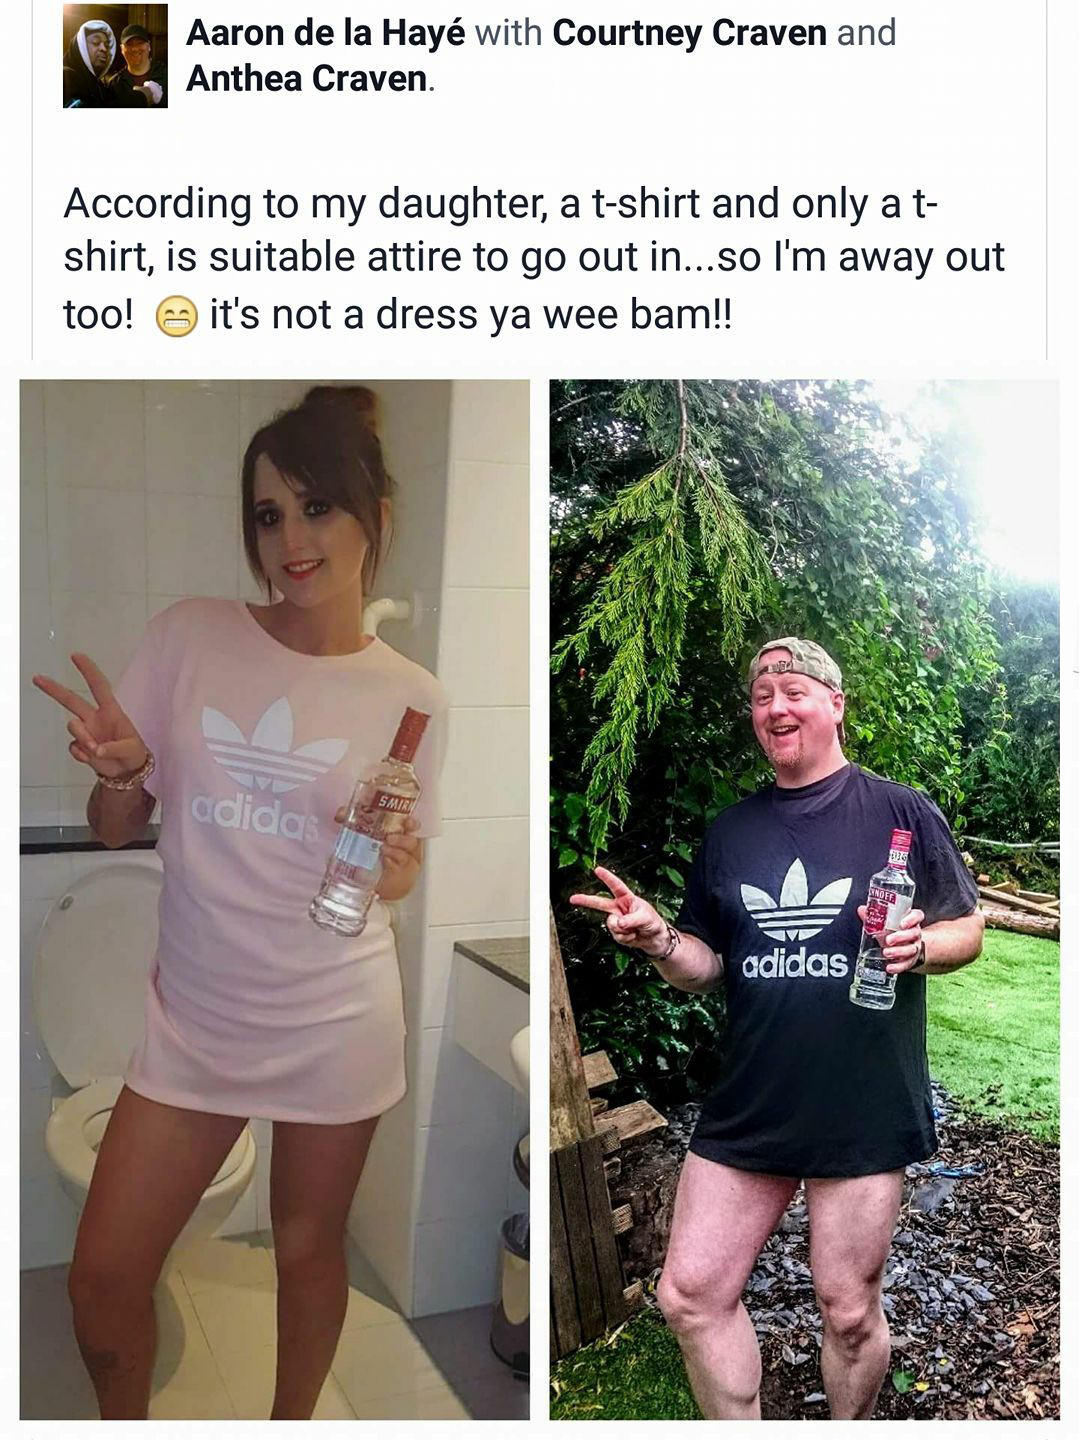 memes - funny dad - Aaron de la Hay with Courtney Craven and Anthea Craven According to my daughter, a tshirt and only a t shirt, is suitable attire to go out in...so I'm away out too! it's not a dress ya wee bam!! dic adidas